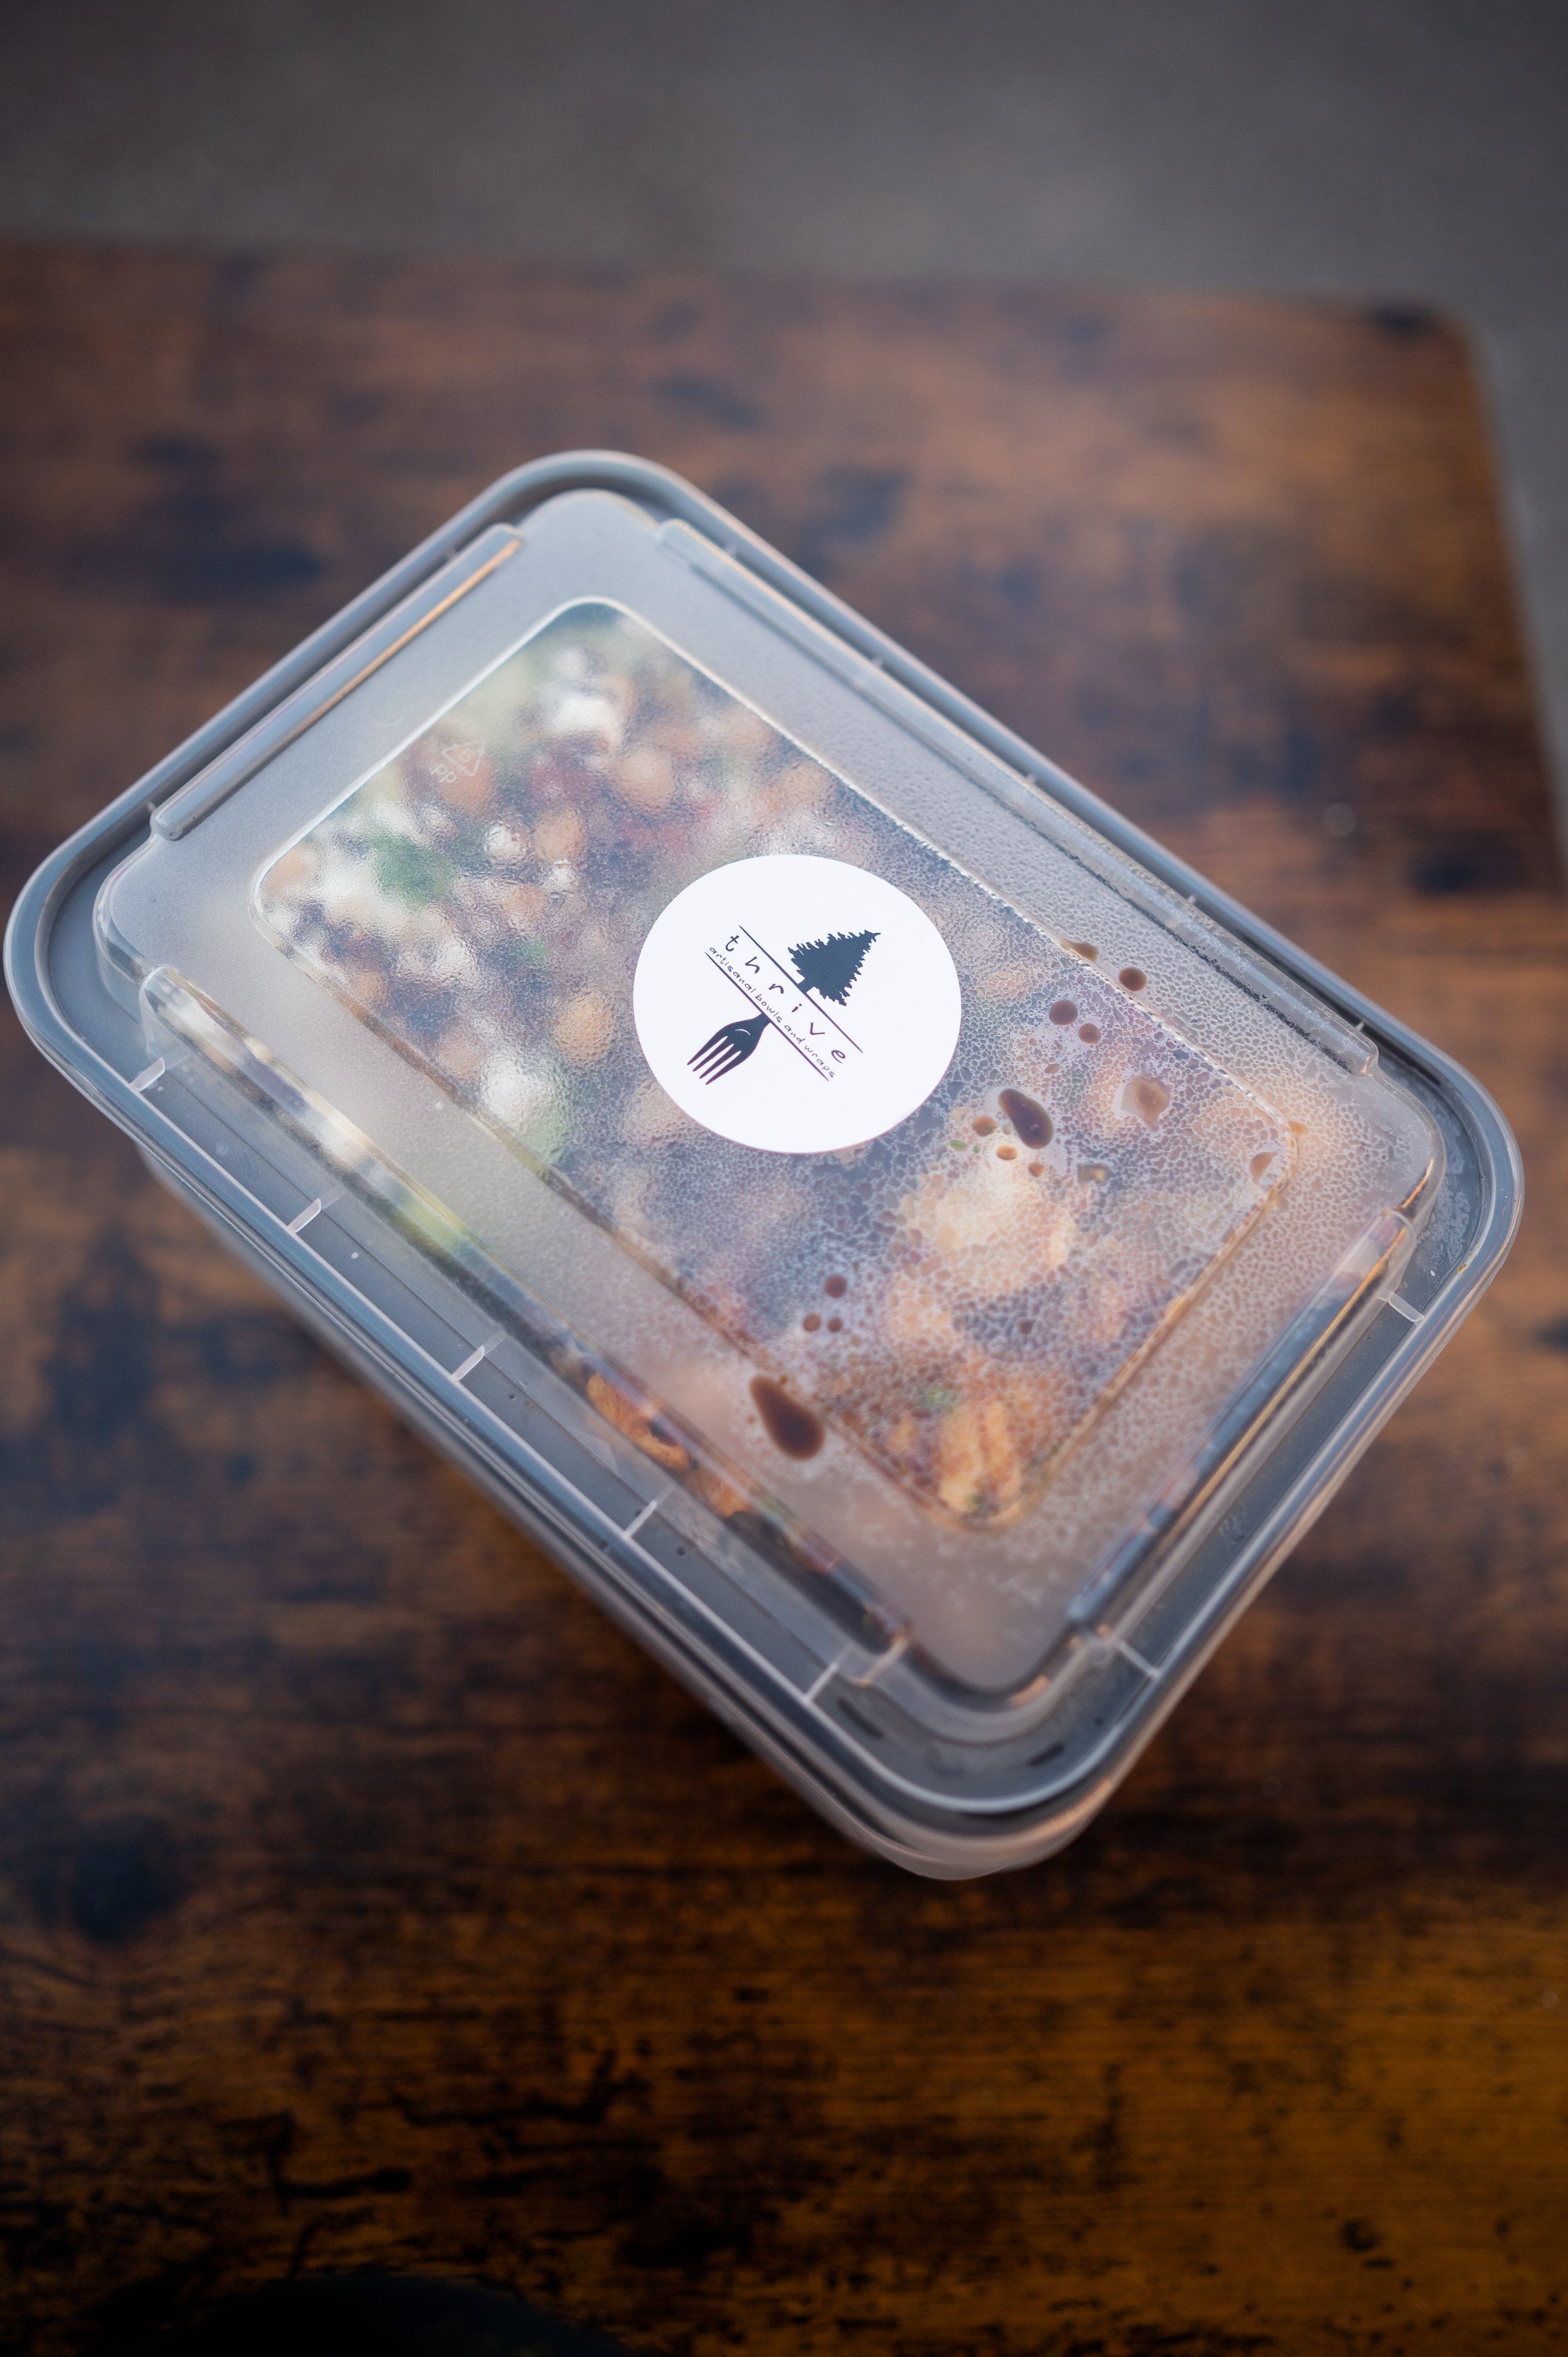 Thrive offers to-go options